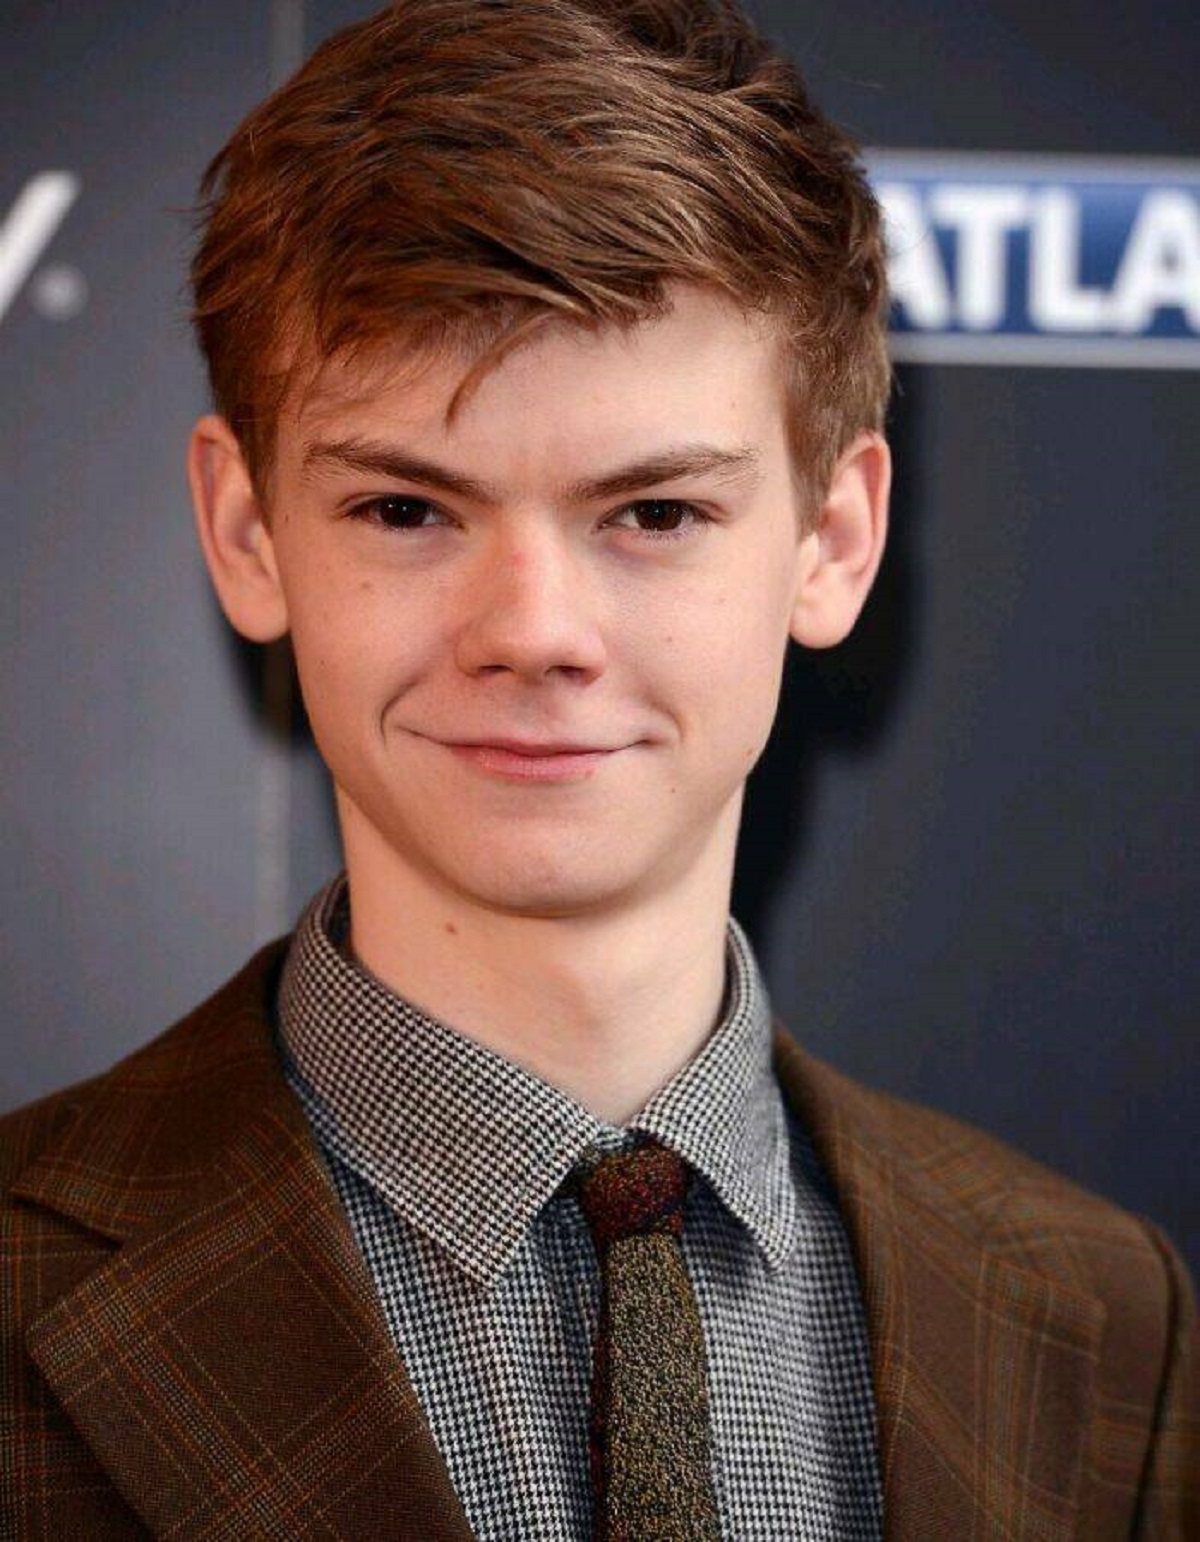 "Thomas Brodie-Sangster... 33 Going On 12"